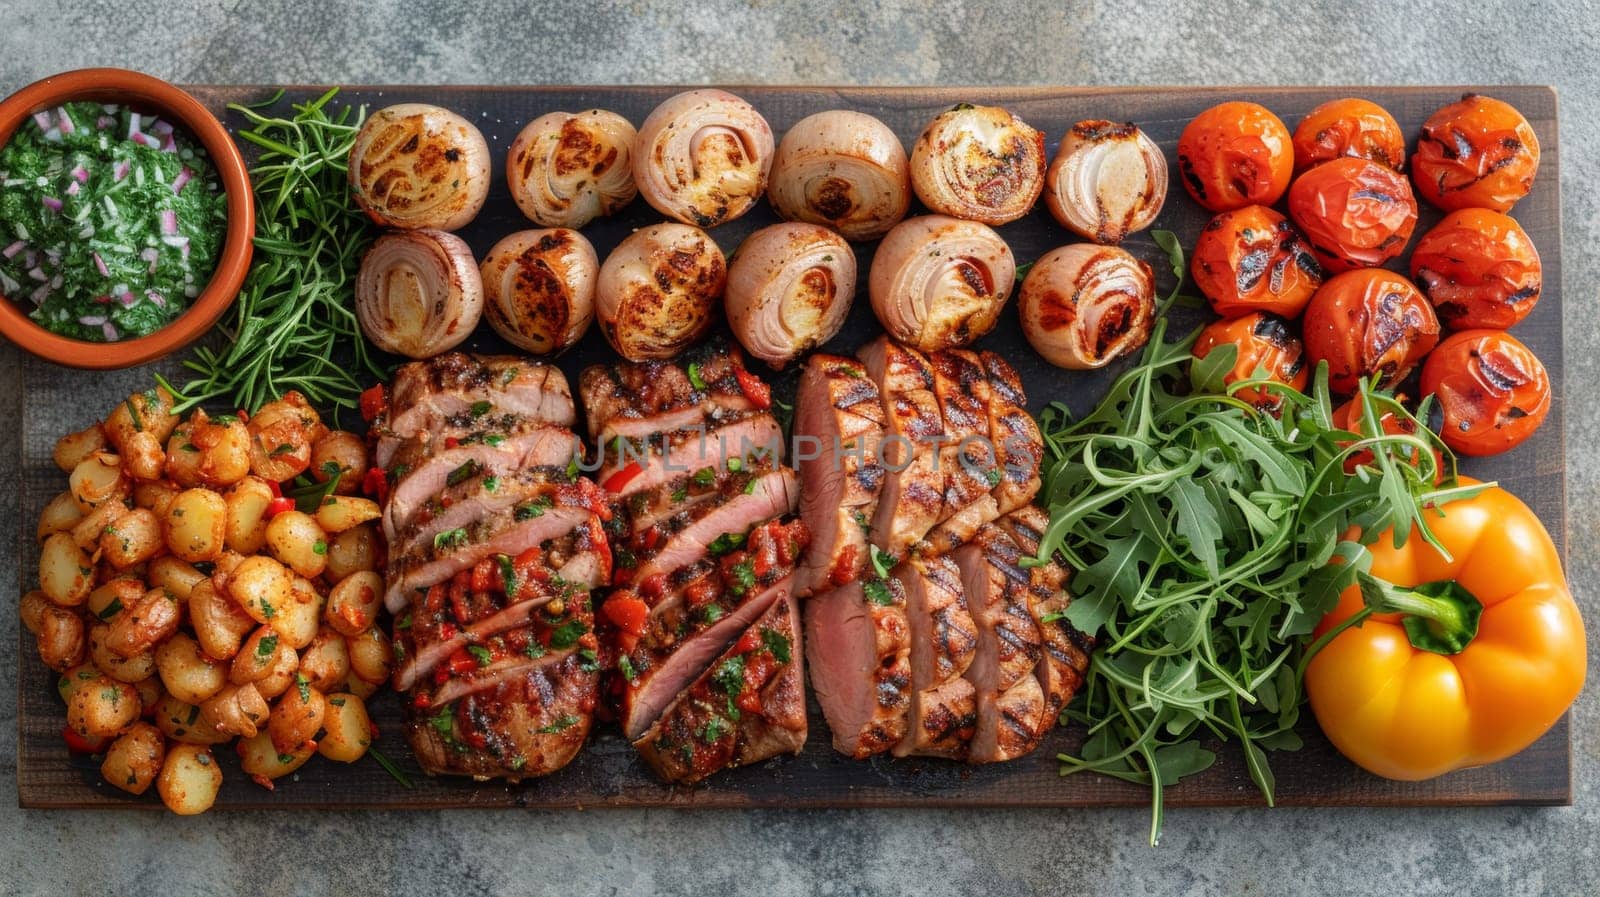 A large platter of meat and vegetables on a wooden board, AI by starush